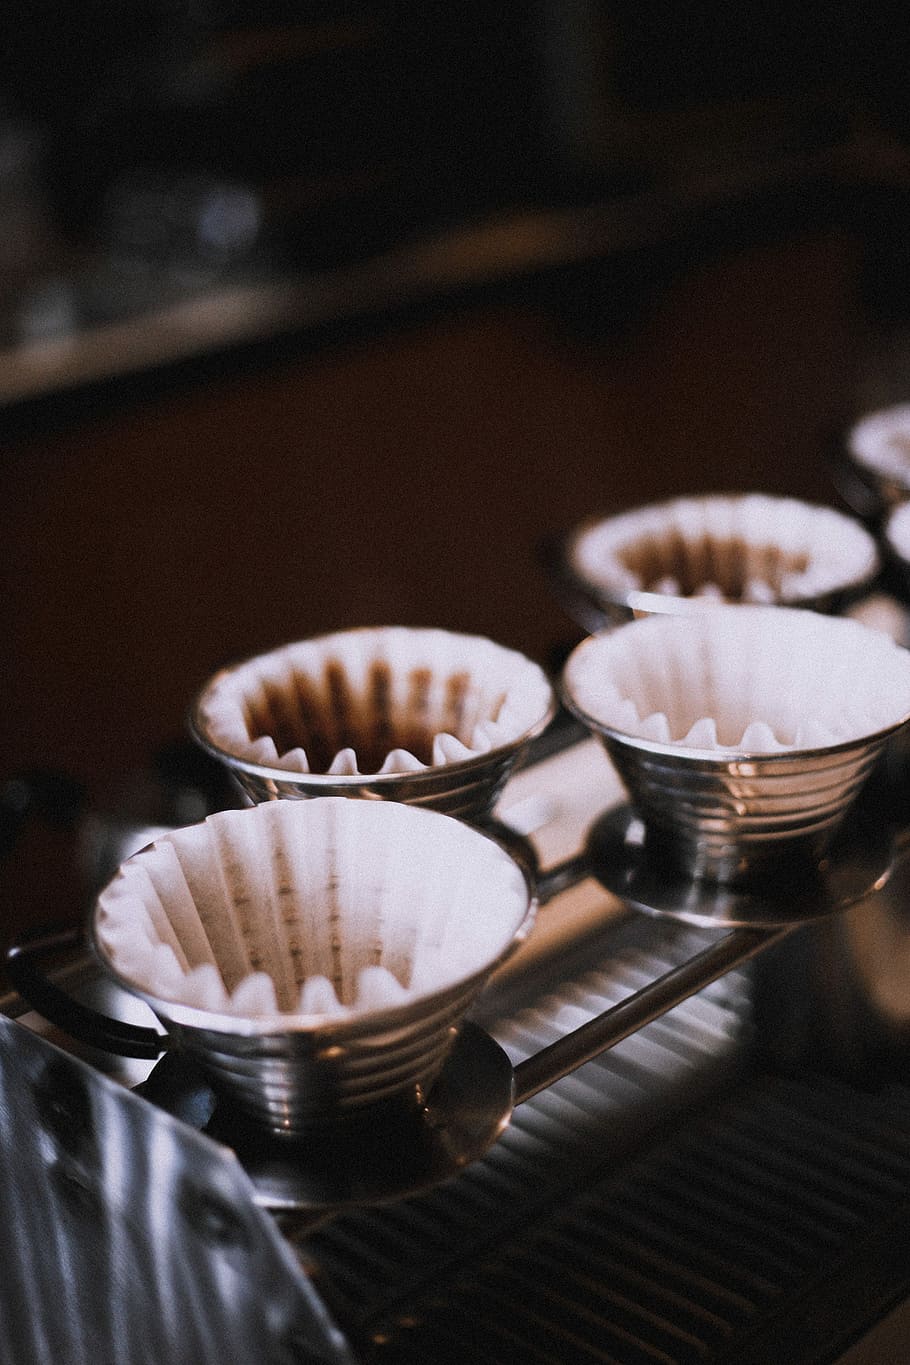 silver teacups, empty muffin mold, coffeeshop, dripcoffee, filter